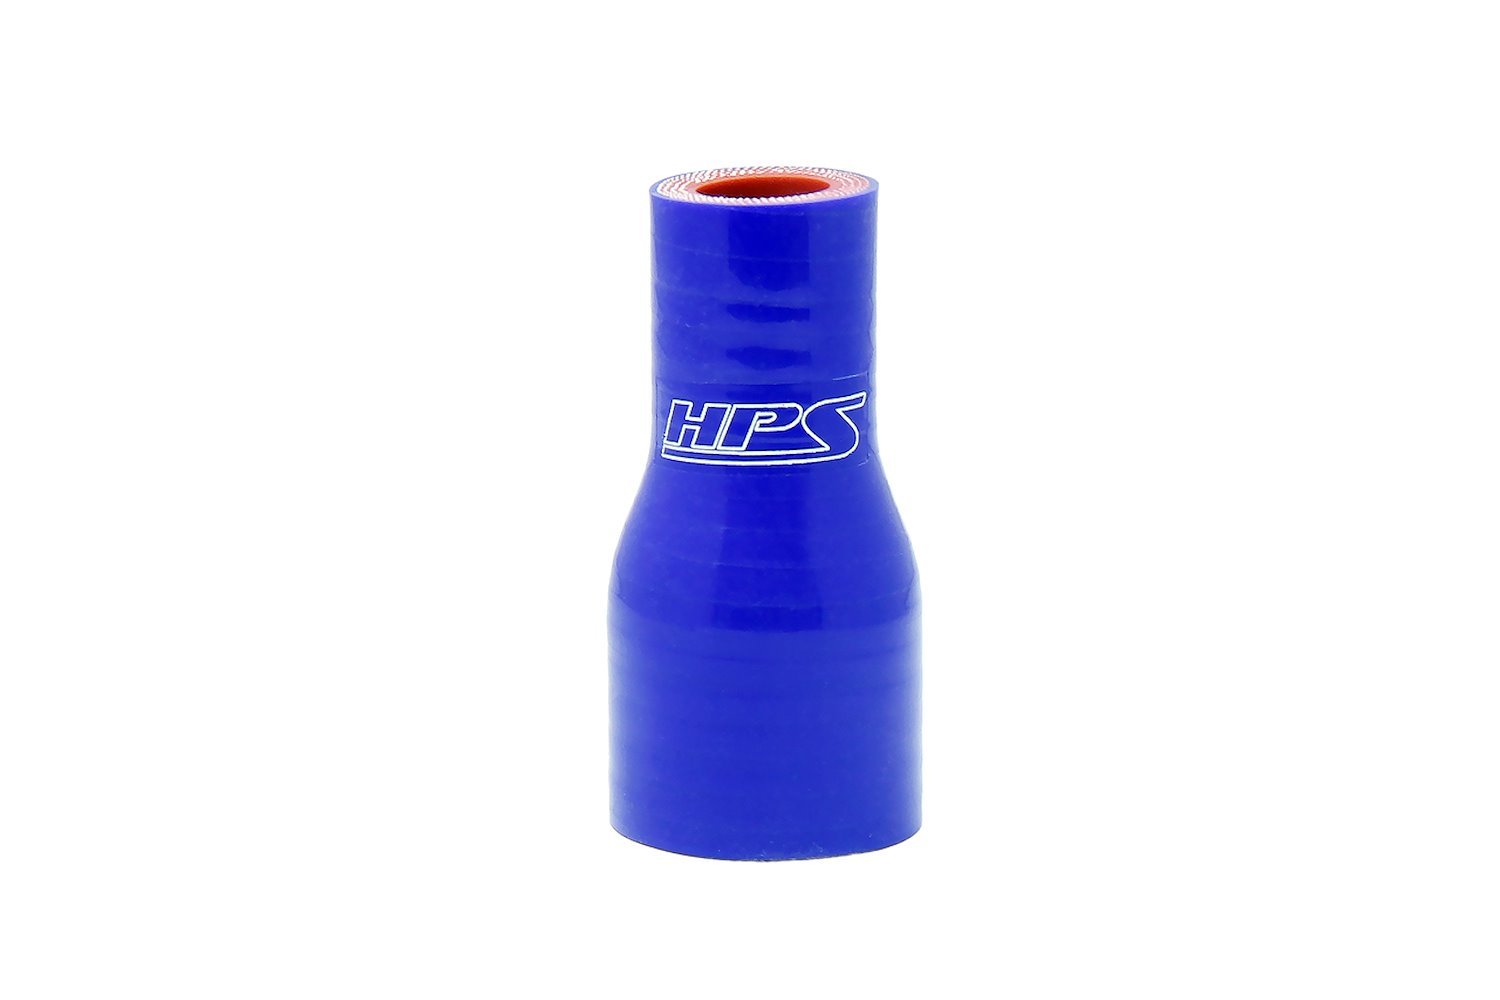 HTSR-100-175-BLUE Silicone Reducer Hose, High-Temp 4-Ply Reinforced, 1 in. - 1-3/4 in. ID, 3 in. Long, Blue